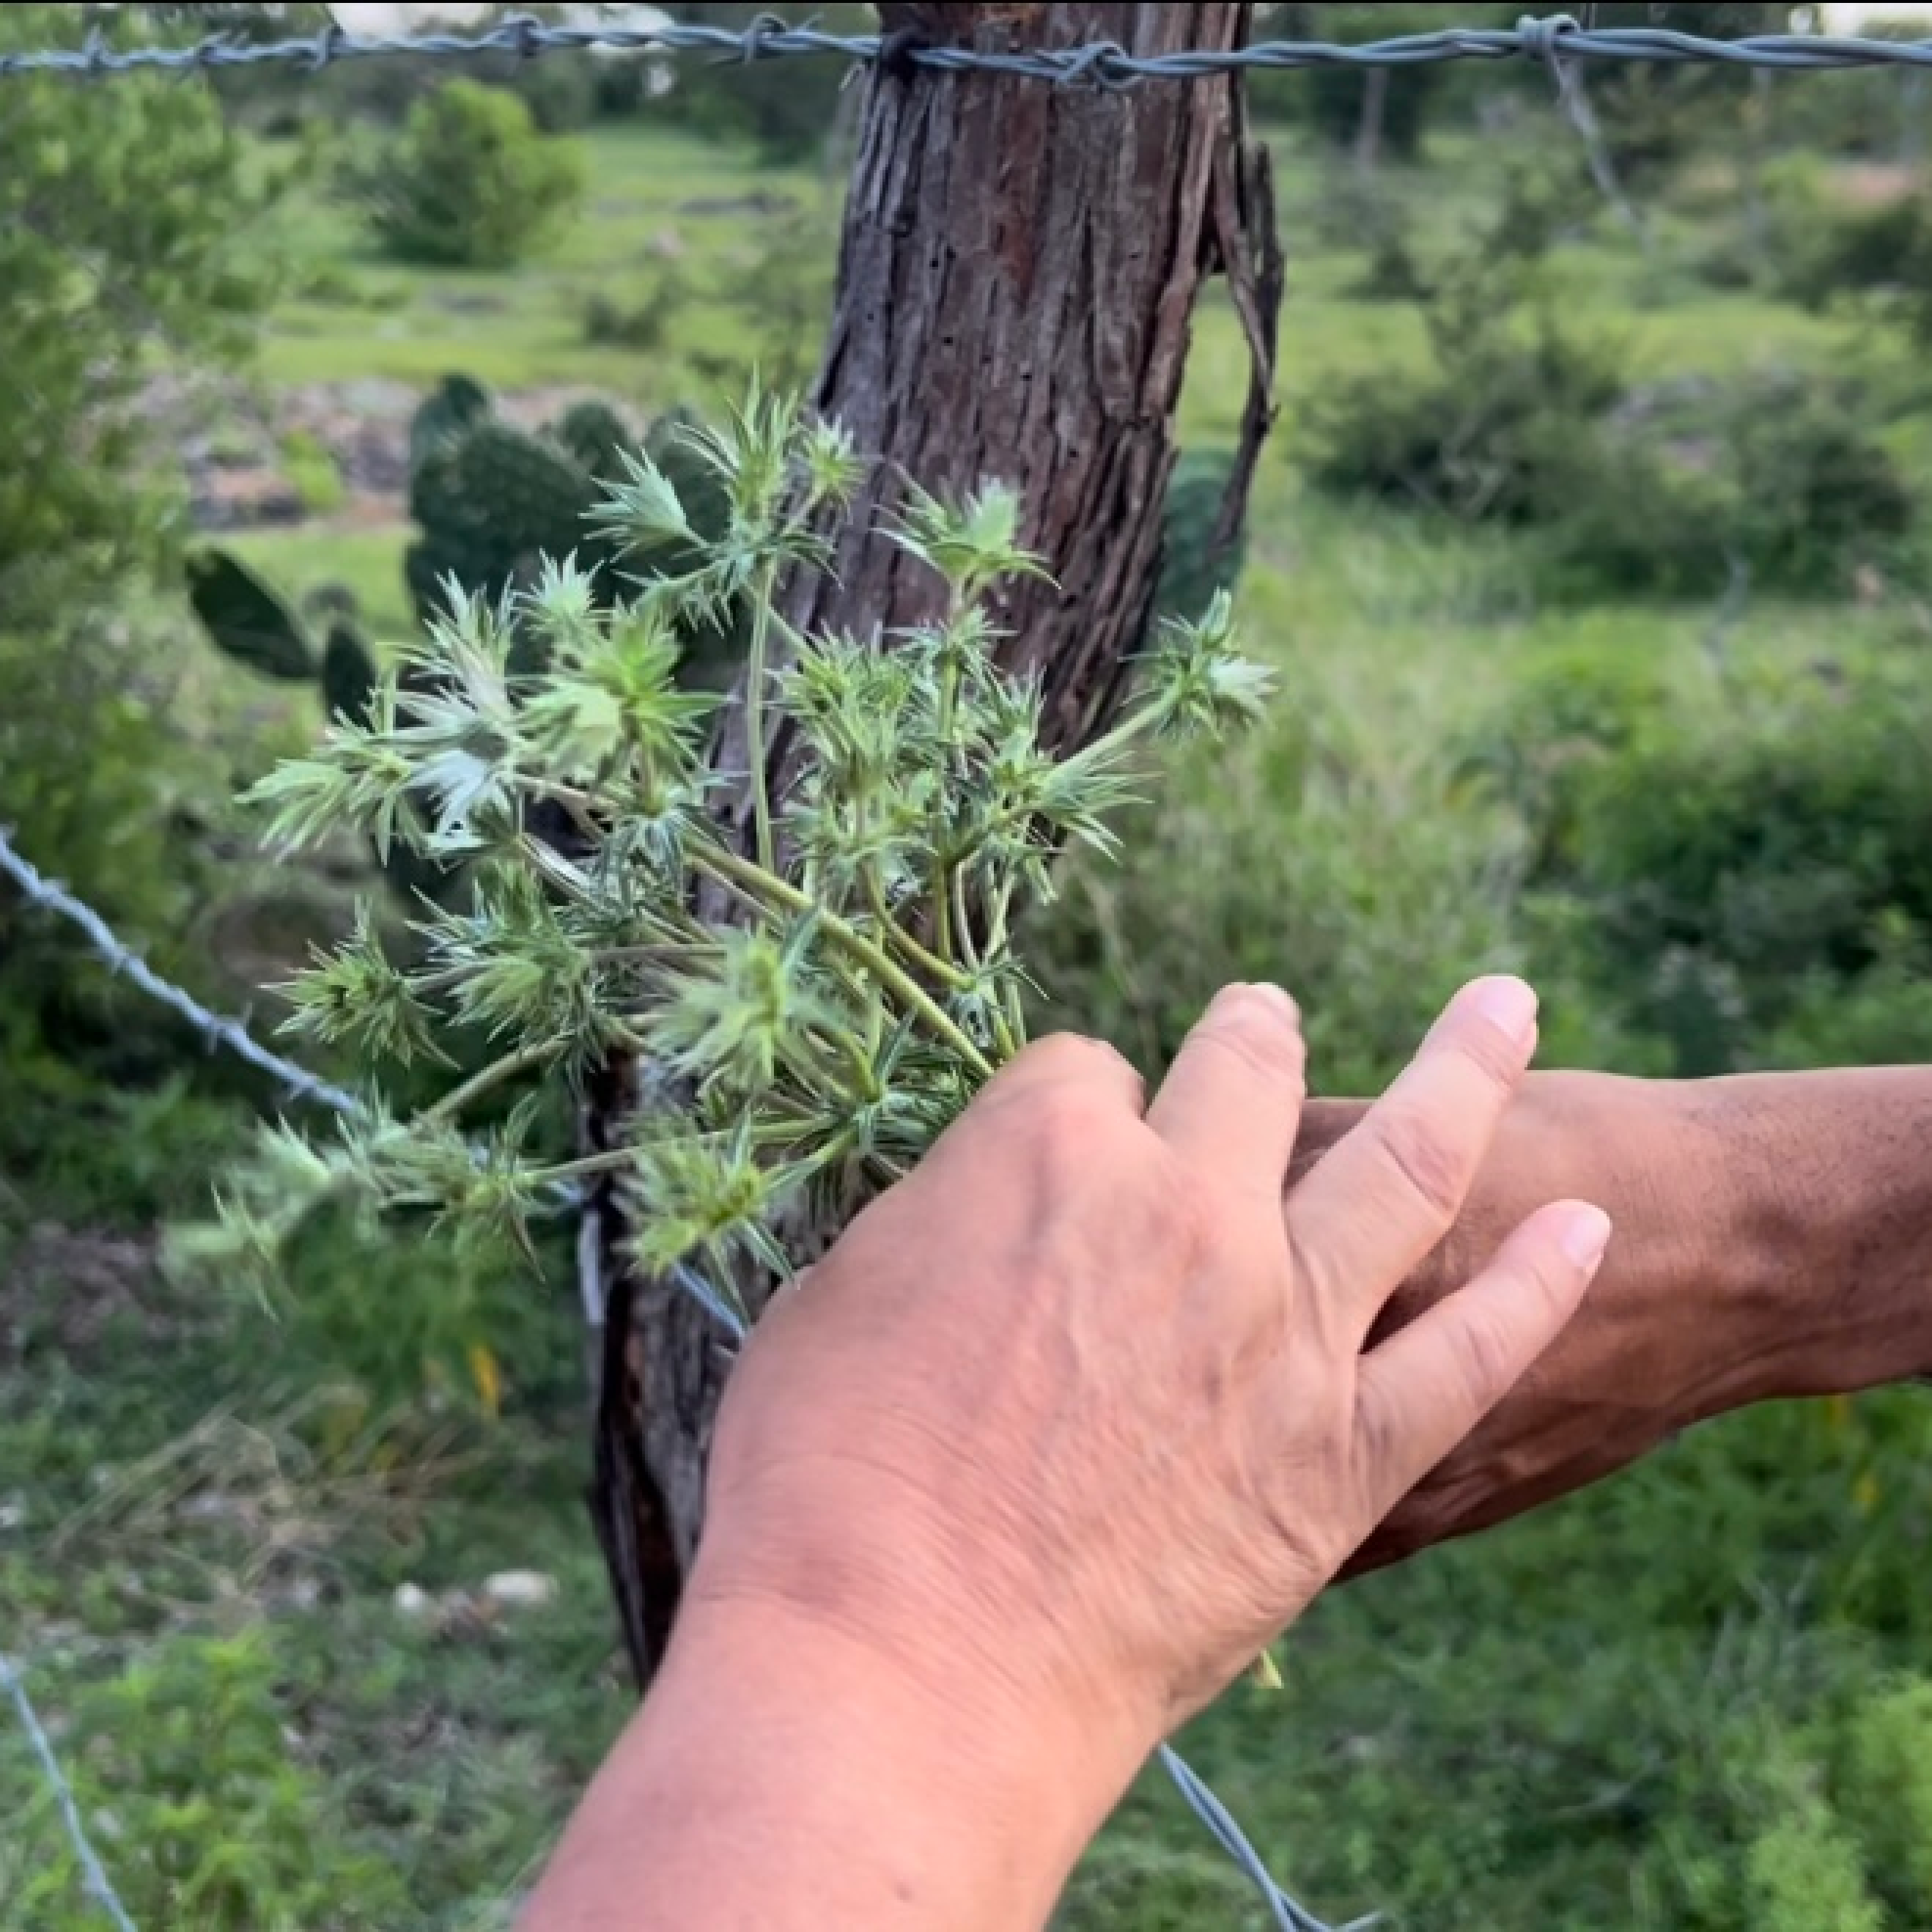 In the foreground, one brown skinned hand holding a plant, Yerba de Sapo, passing it to a darker brown hand. In the background, a fence post and a barbed wire gate with green shrubs.